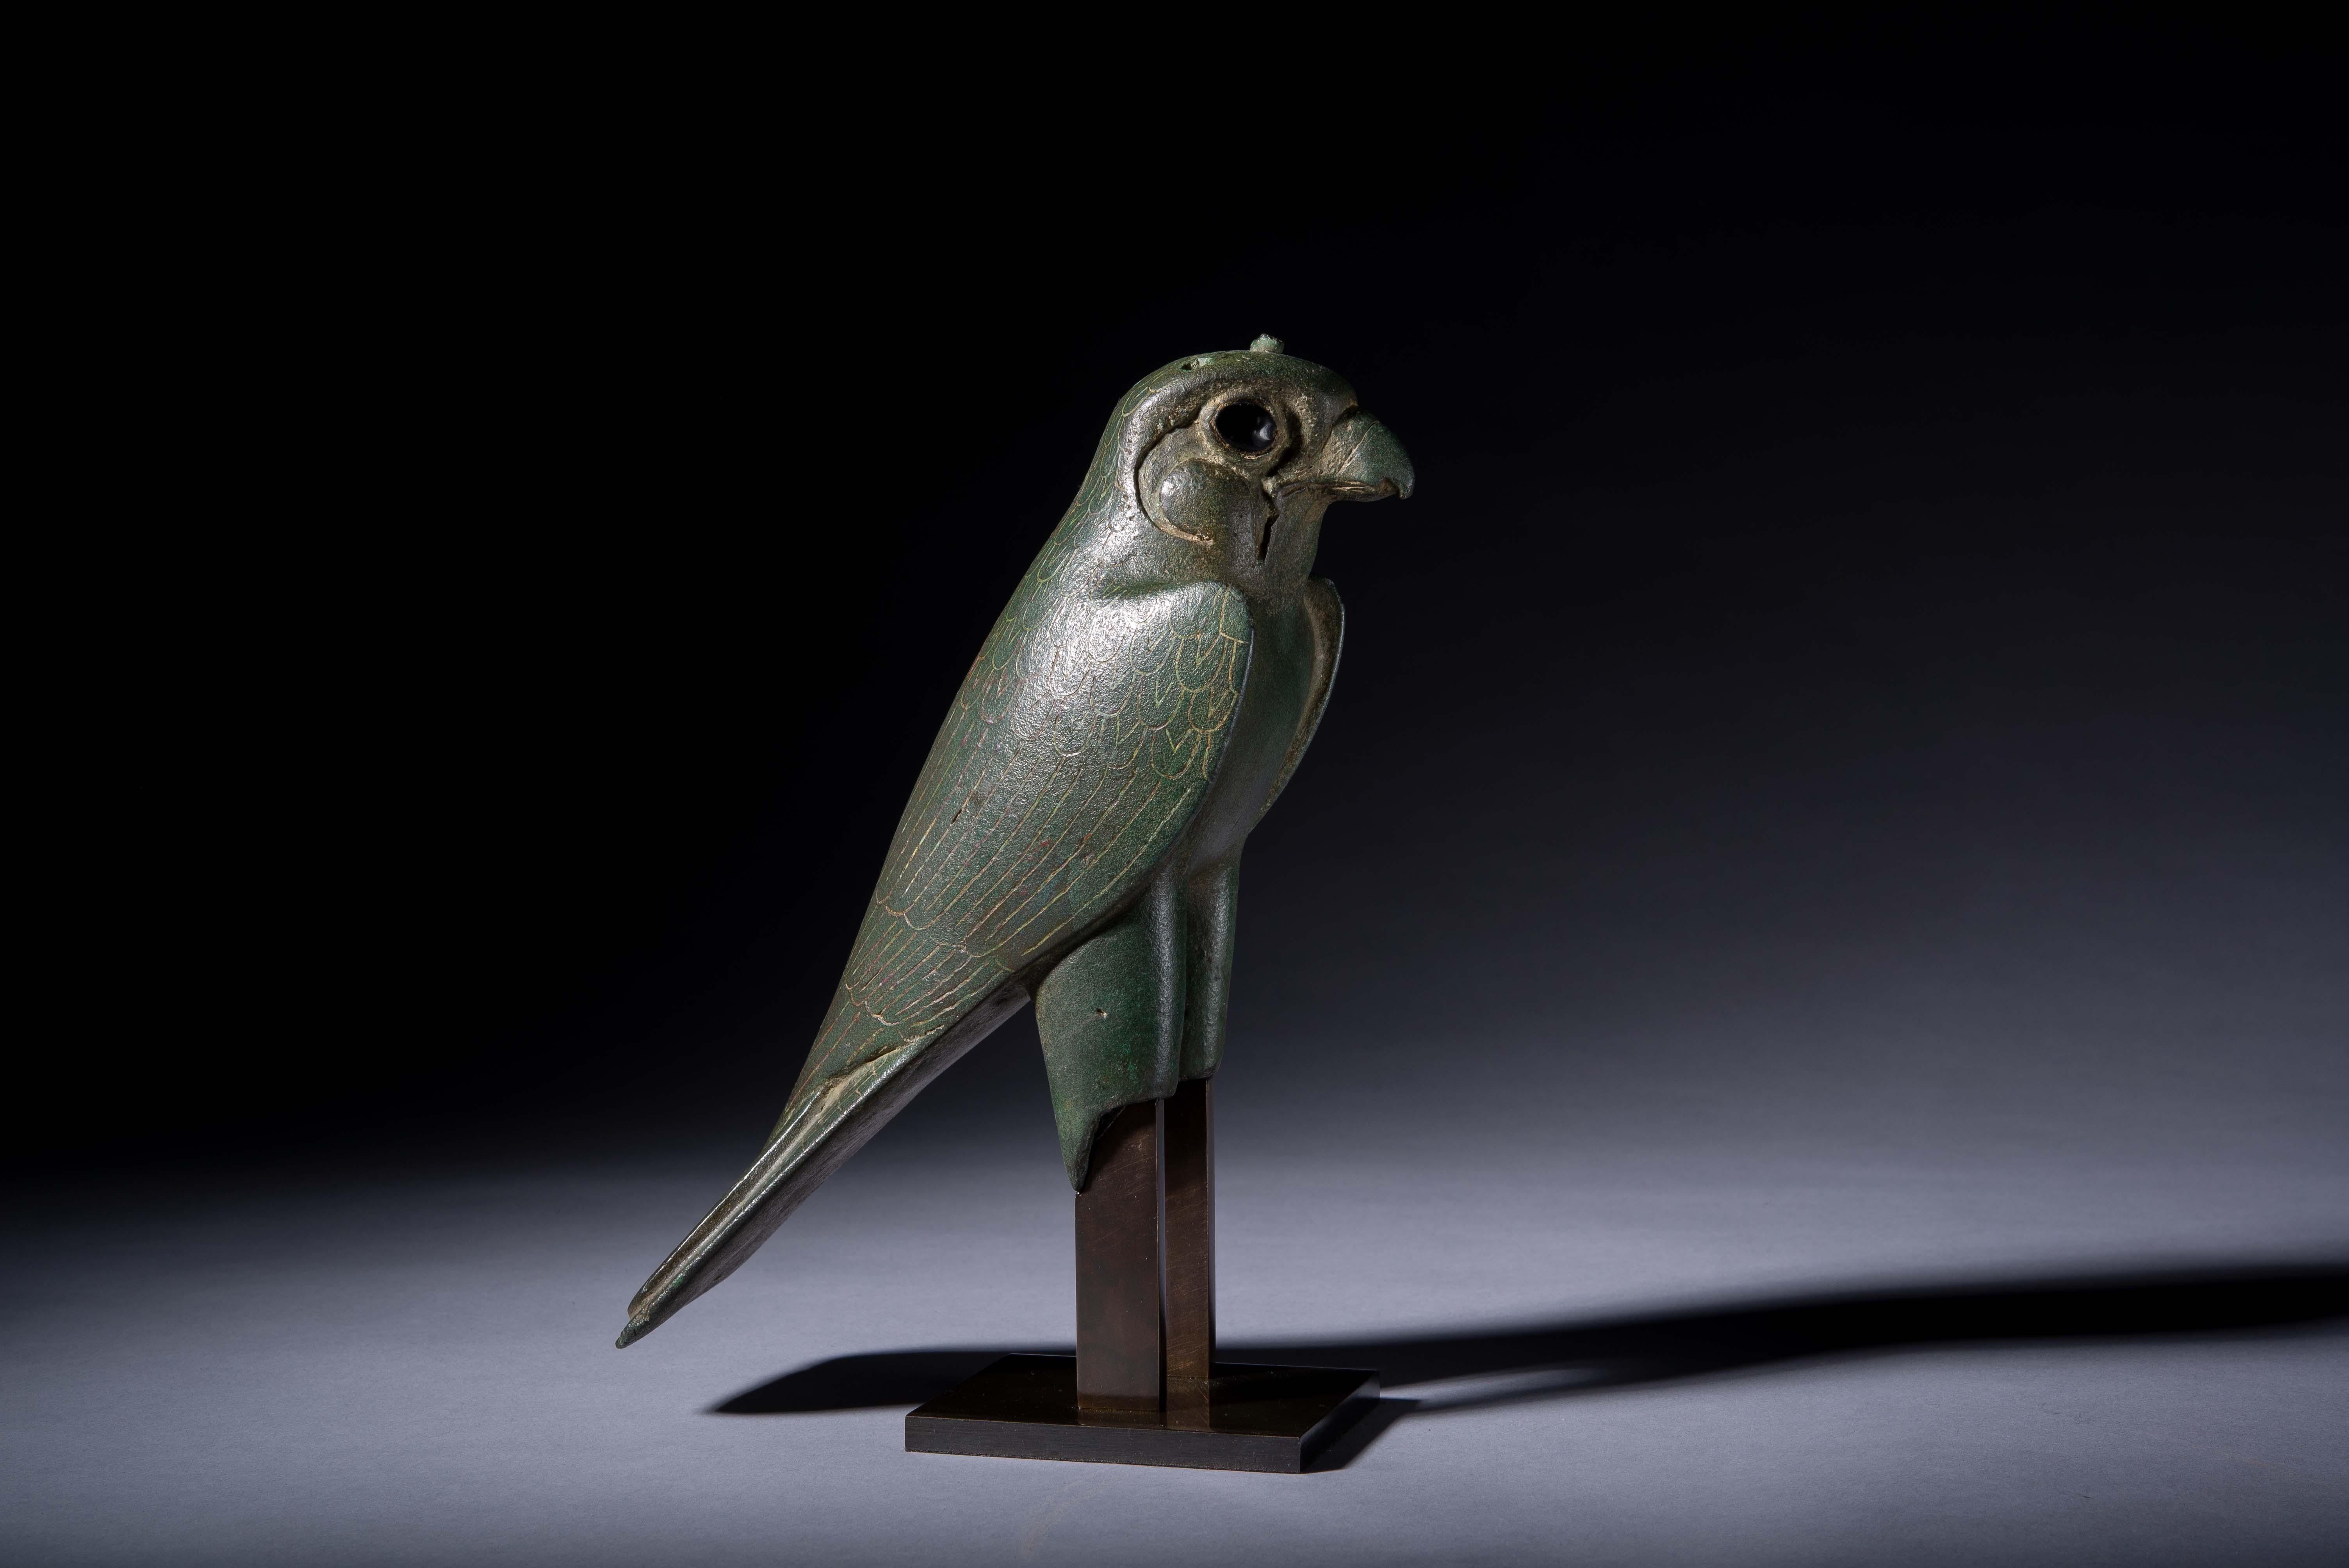 An Egyptian bronze Horus falcon, Late Period, circa 716-30 B.C.

“I am Horus, the great Falcon... My flight has reached the horizon... I have gone further than the gods of old. Even the most ancient bird could not equal my very first flight... No